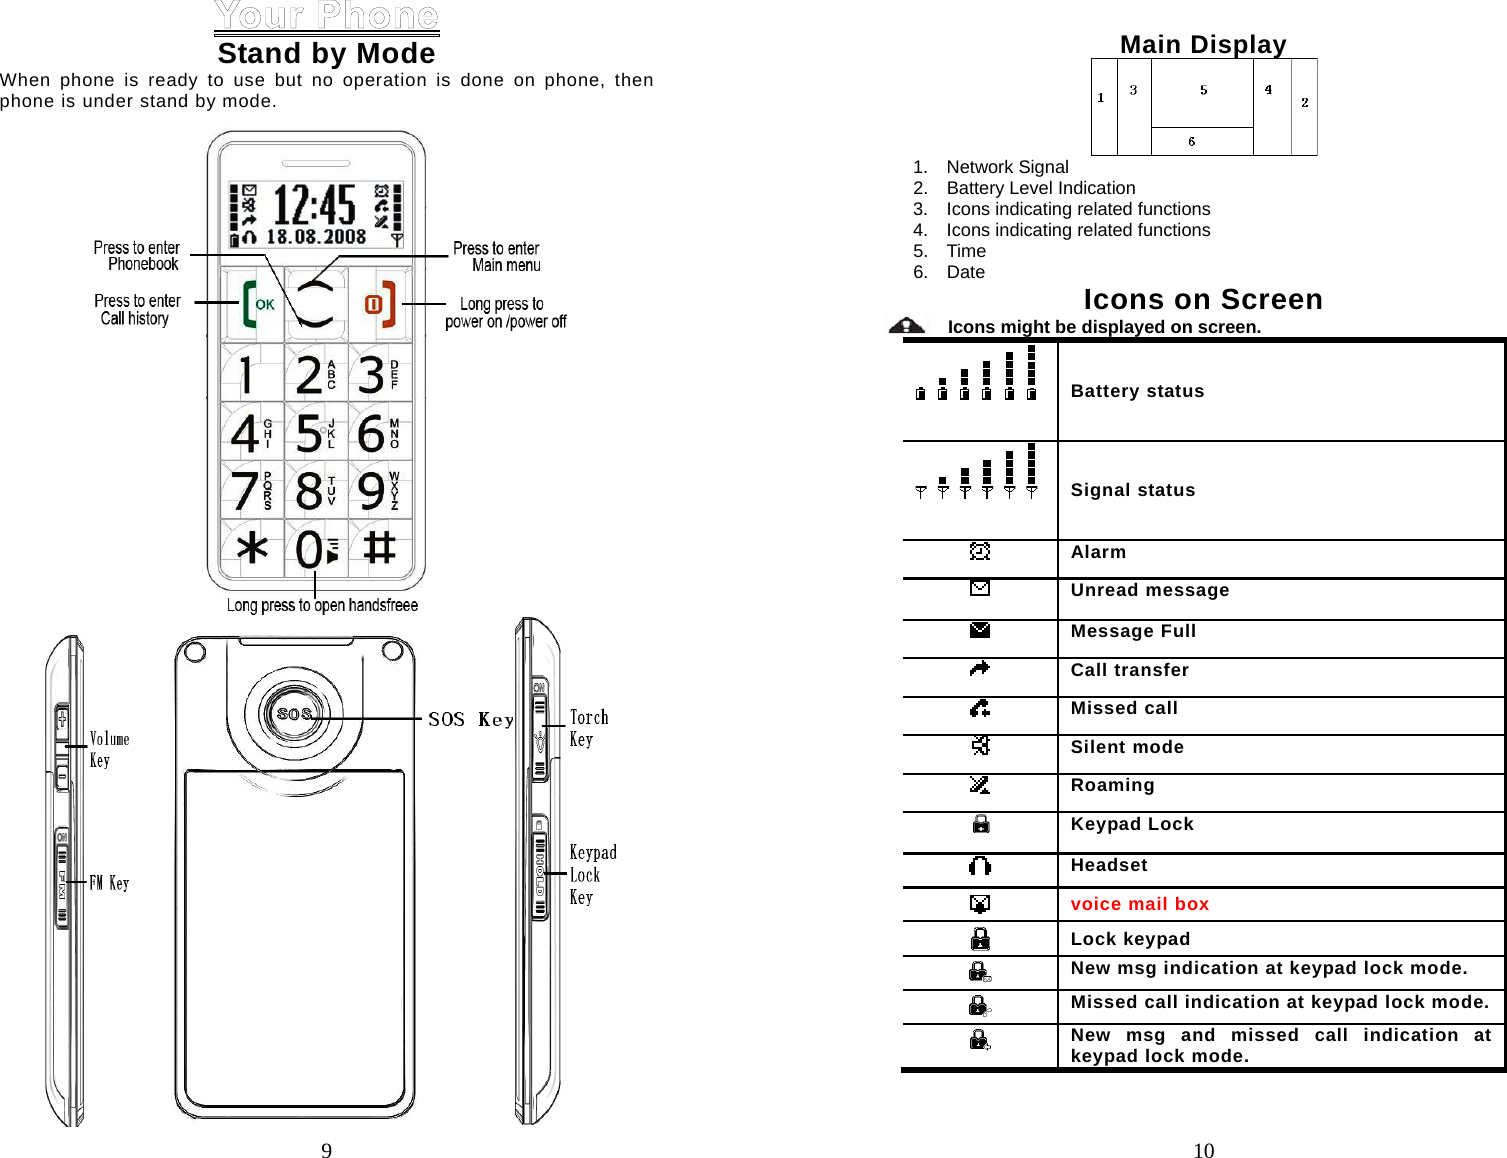  9 Stand by Mode When phone is ready to use but no operation is done on phone, then phone is under stand by mode.         10            Main Display    1.  Network Signal                   2.  Battery Level Indication          3.    Icons indicating related functions 4.  Icons indicating related functions            5.  Time        6.  Date  Icons on Screen     Icons might be displayed on screen.           Battery status           Signal status  Alarm Unread message Message Full Call transfer Missed call Silent mode Roaming Keypad LockHeadset voice mail box Lock keypad New msg indication at keypad lock mode. Missed call indication at keypad lock mode. New msg and missed call indication at keypad lock mode.   